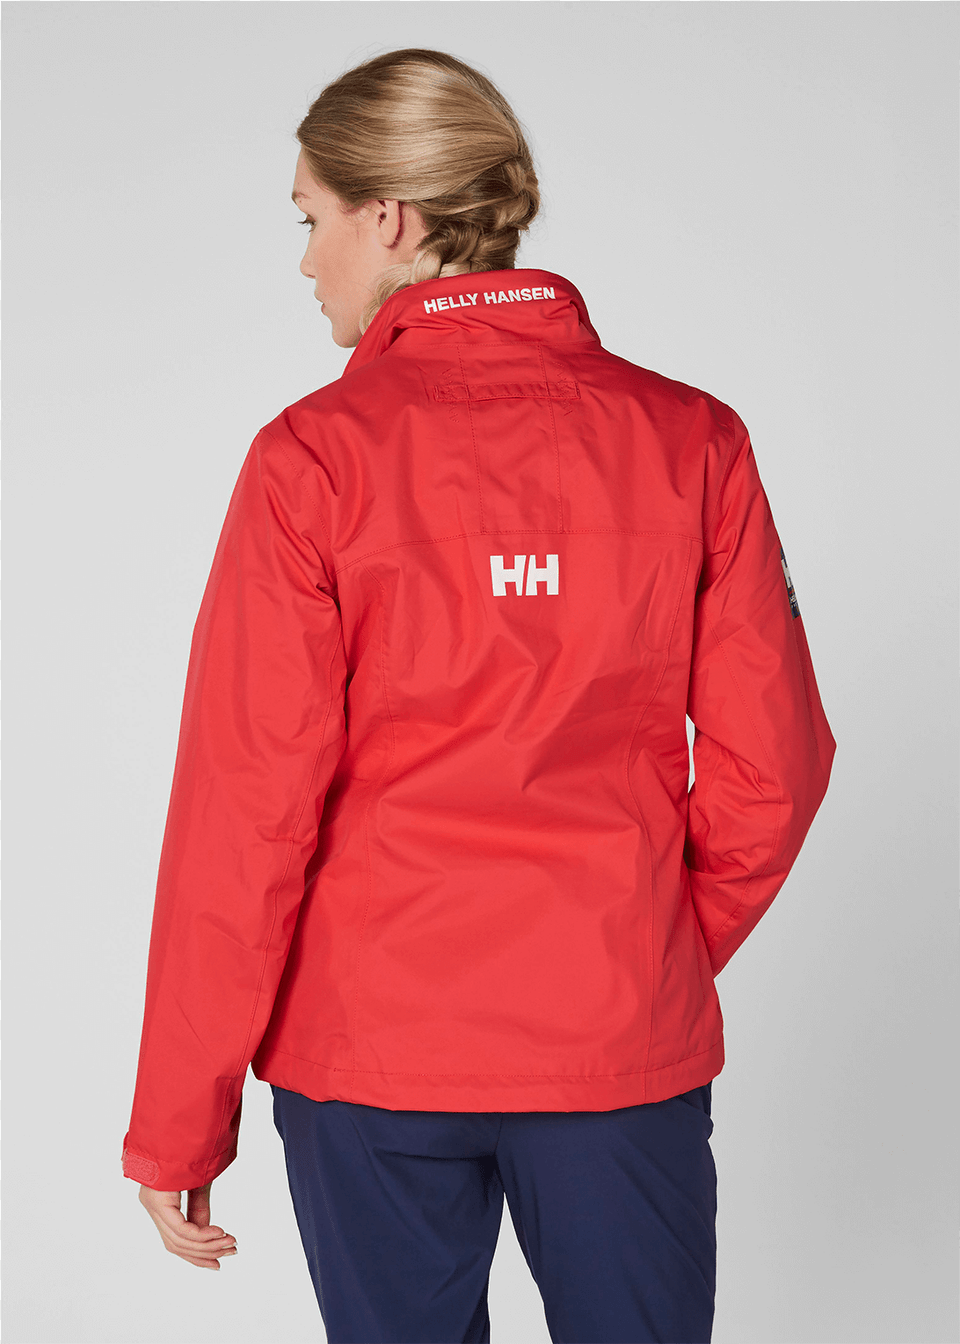 Helly Hansen Womens Jacket, Clothing, Coat, Adult, Male Png